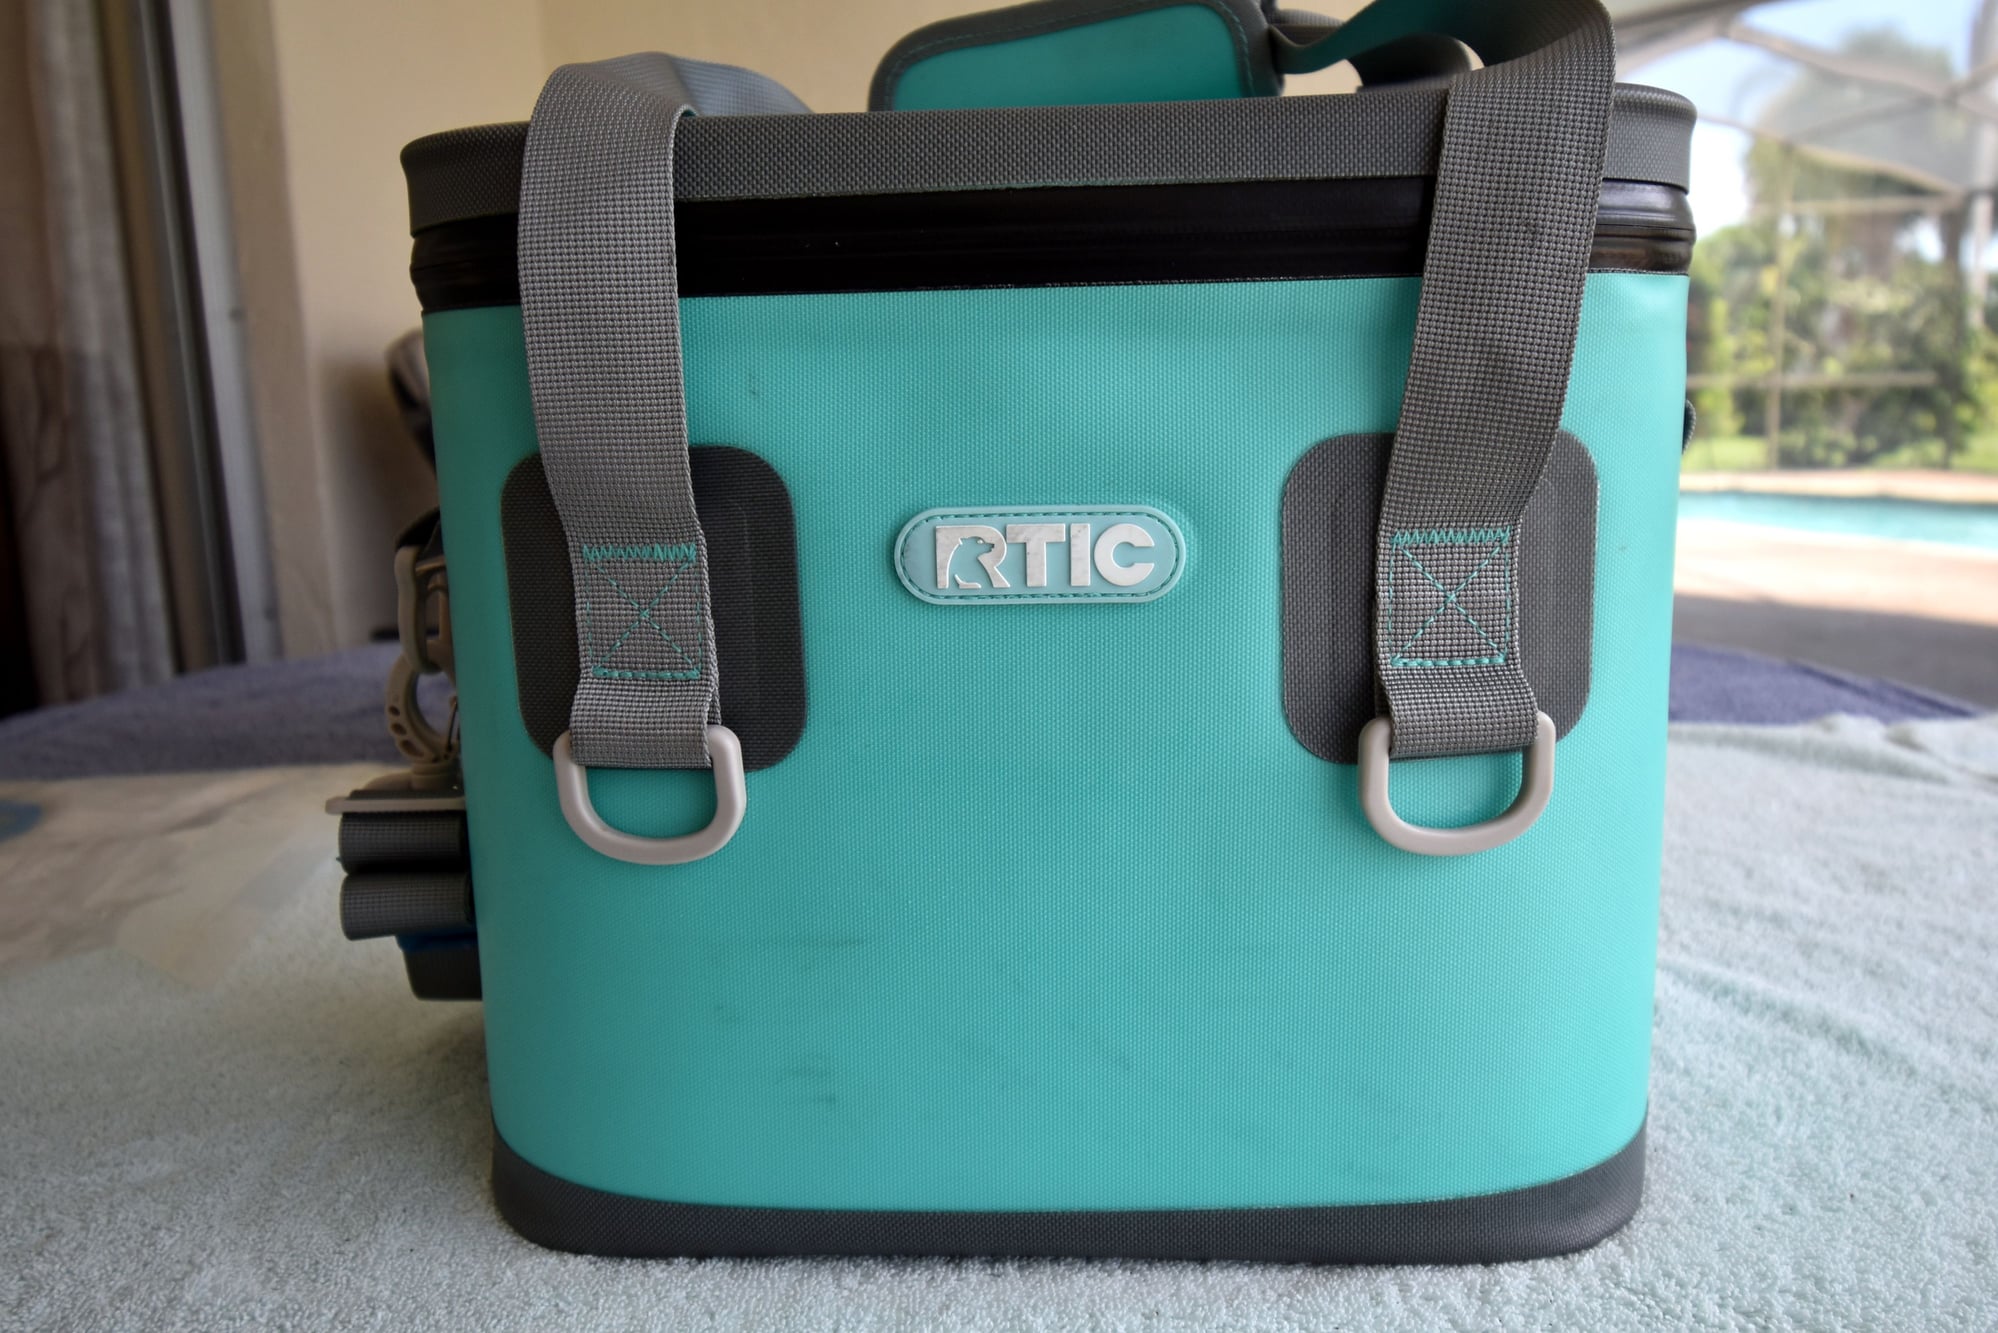 RTIC Soft Cooler - The Hull Truth - Boating and Fishing Forum